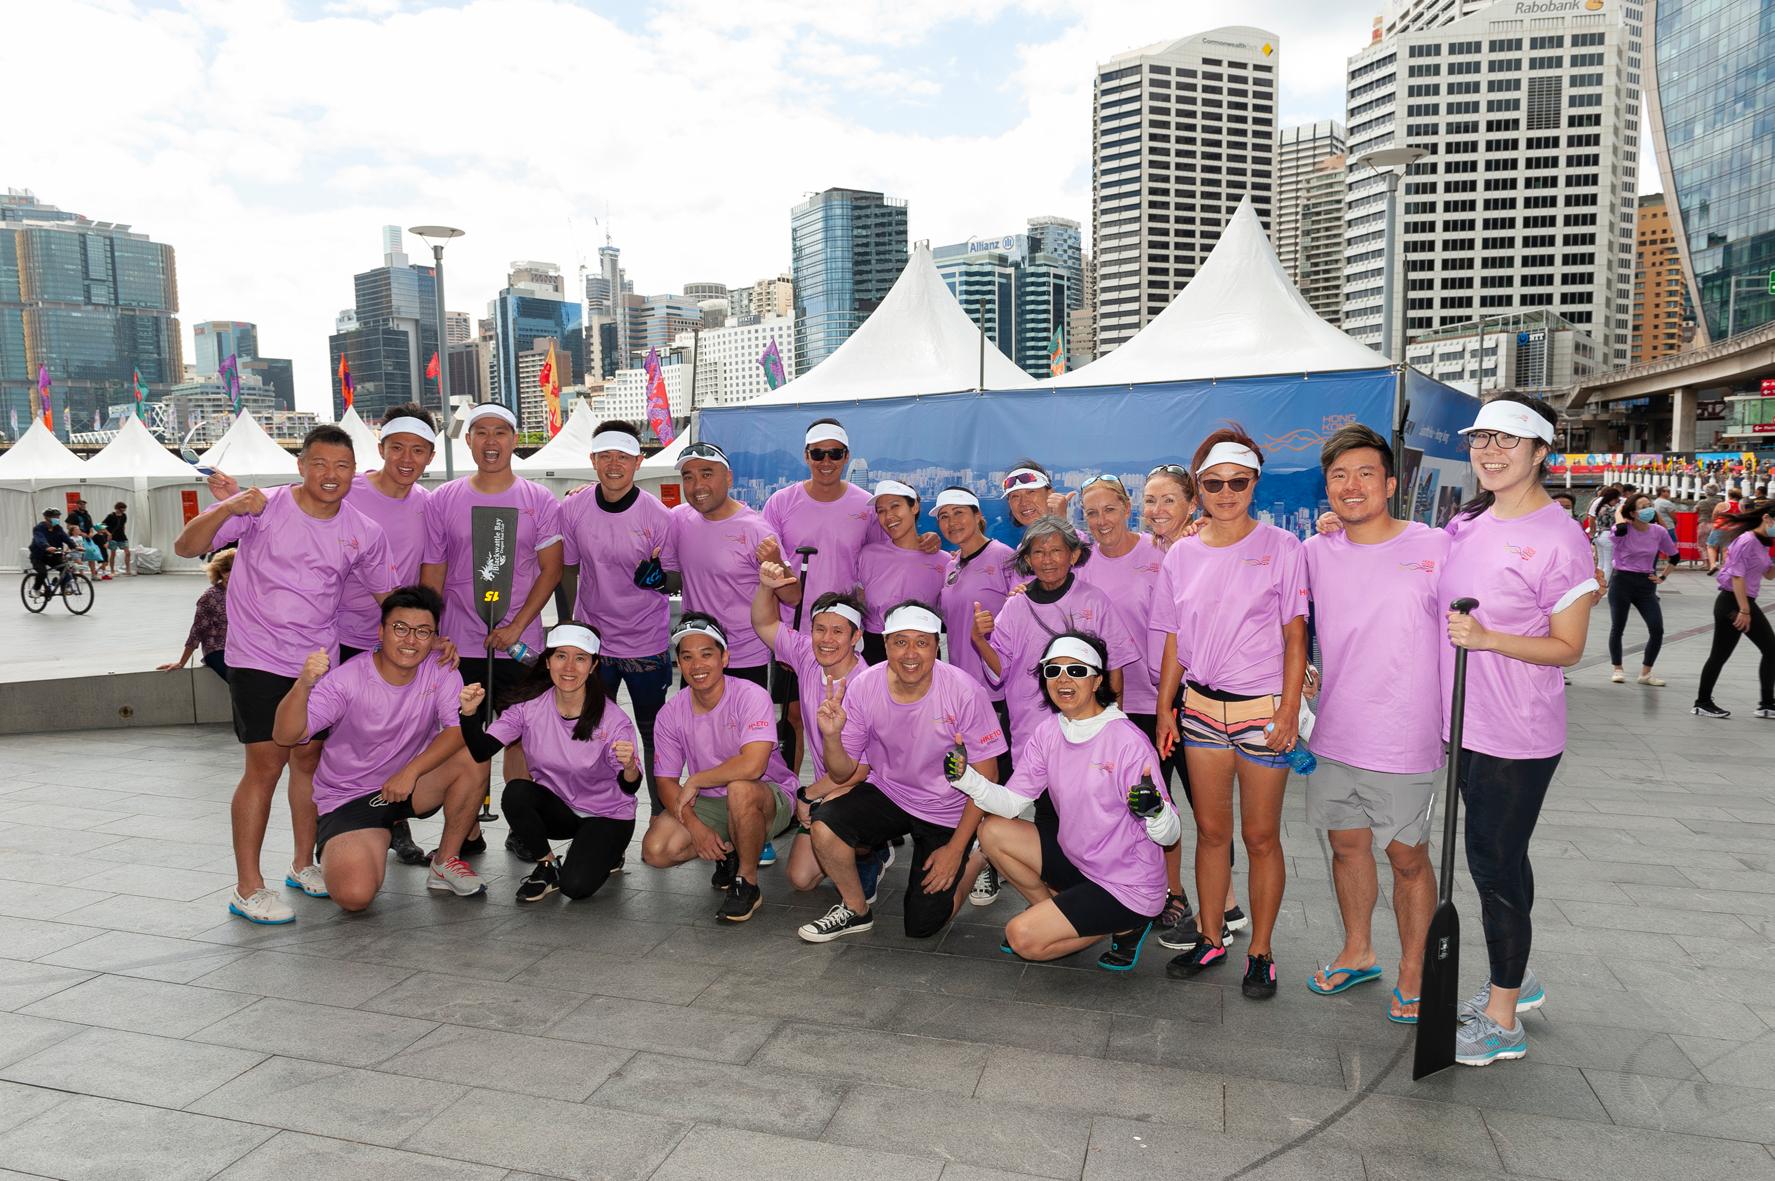 The Hong Kong Economic and Trade Office, Sydney (HKETO) participated in the Sydney Lunar Festival Dragon Boat Races in Darling Harbour in Sydney, Australia on February 5 and 6. The Hong Kong Team organised by the HKETO won third place in the Hong Kong Connect Cup races on February 6.